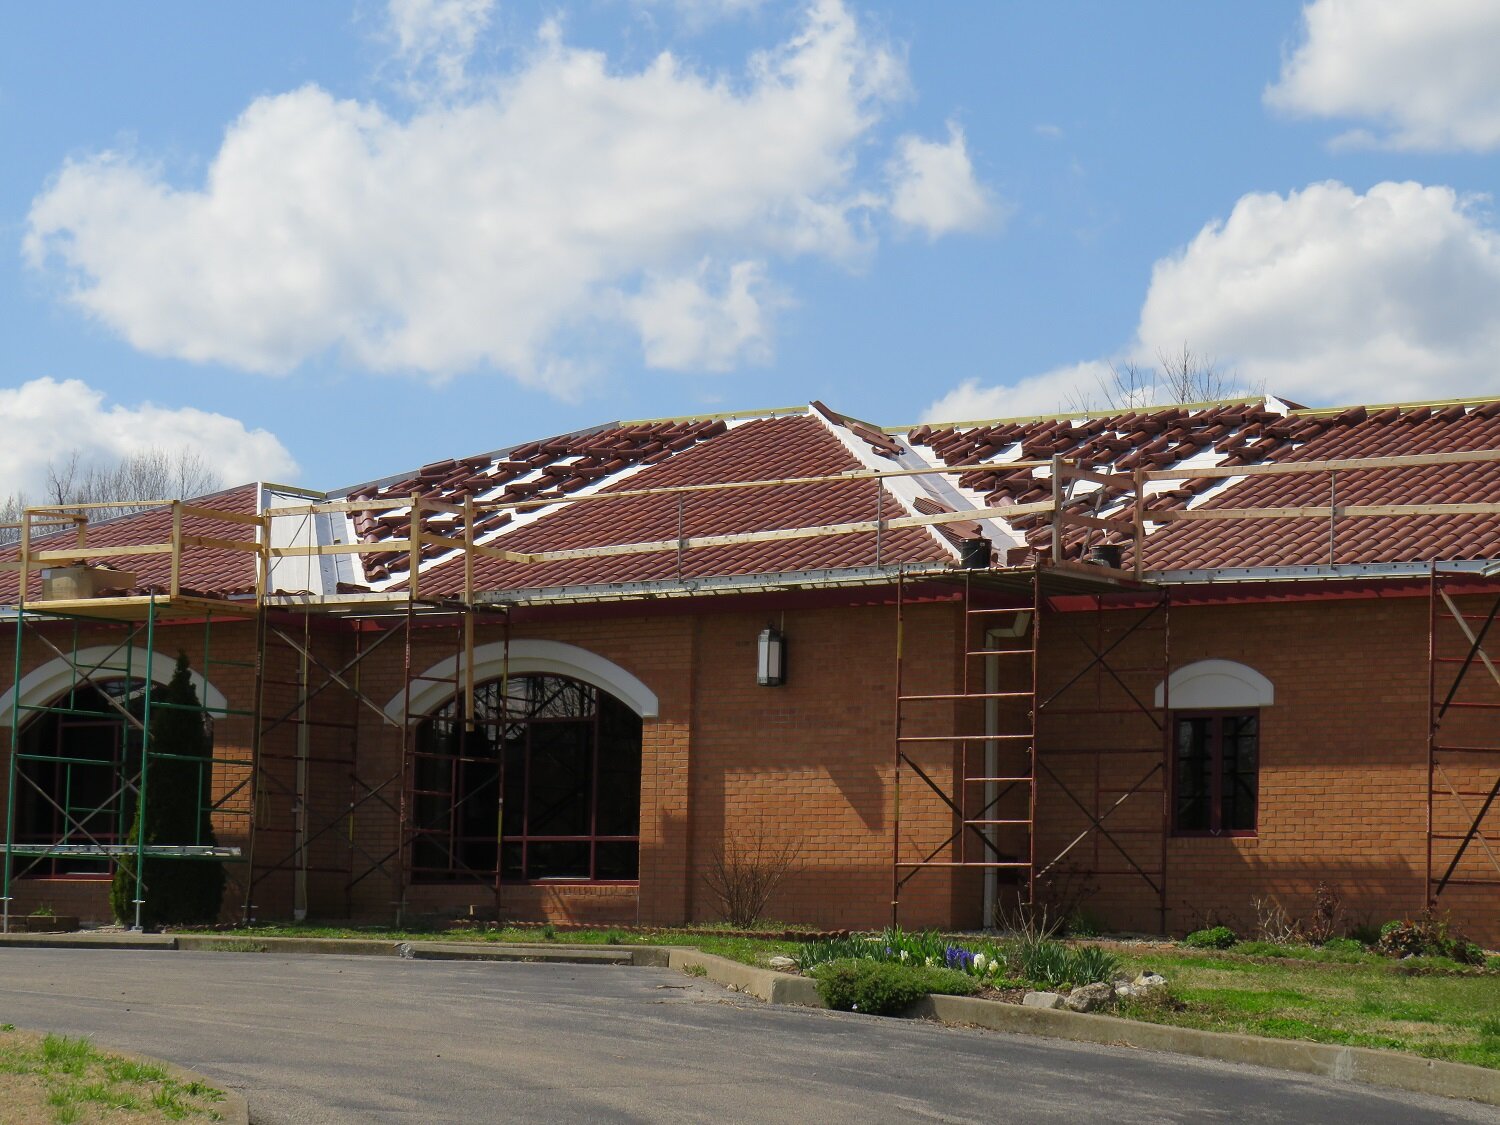  March 24 - retreat house roof is almost complete, and the red fascia is installed 